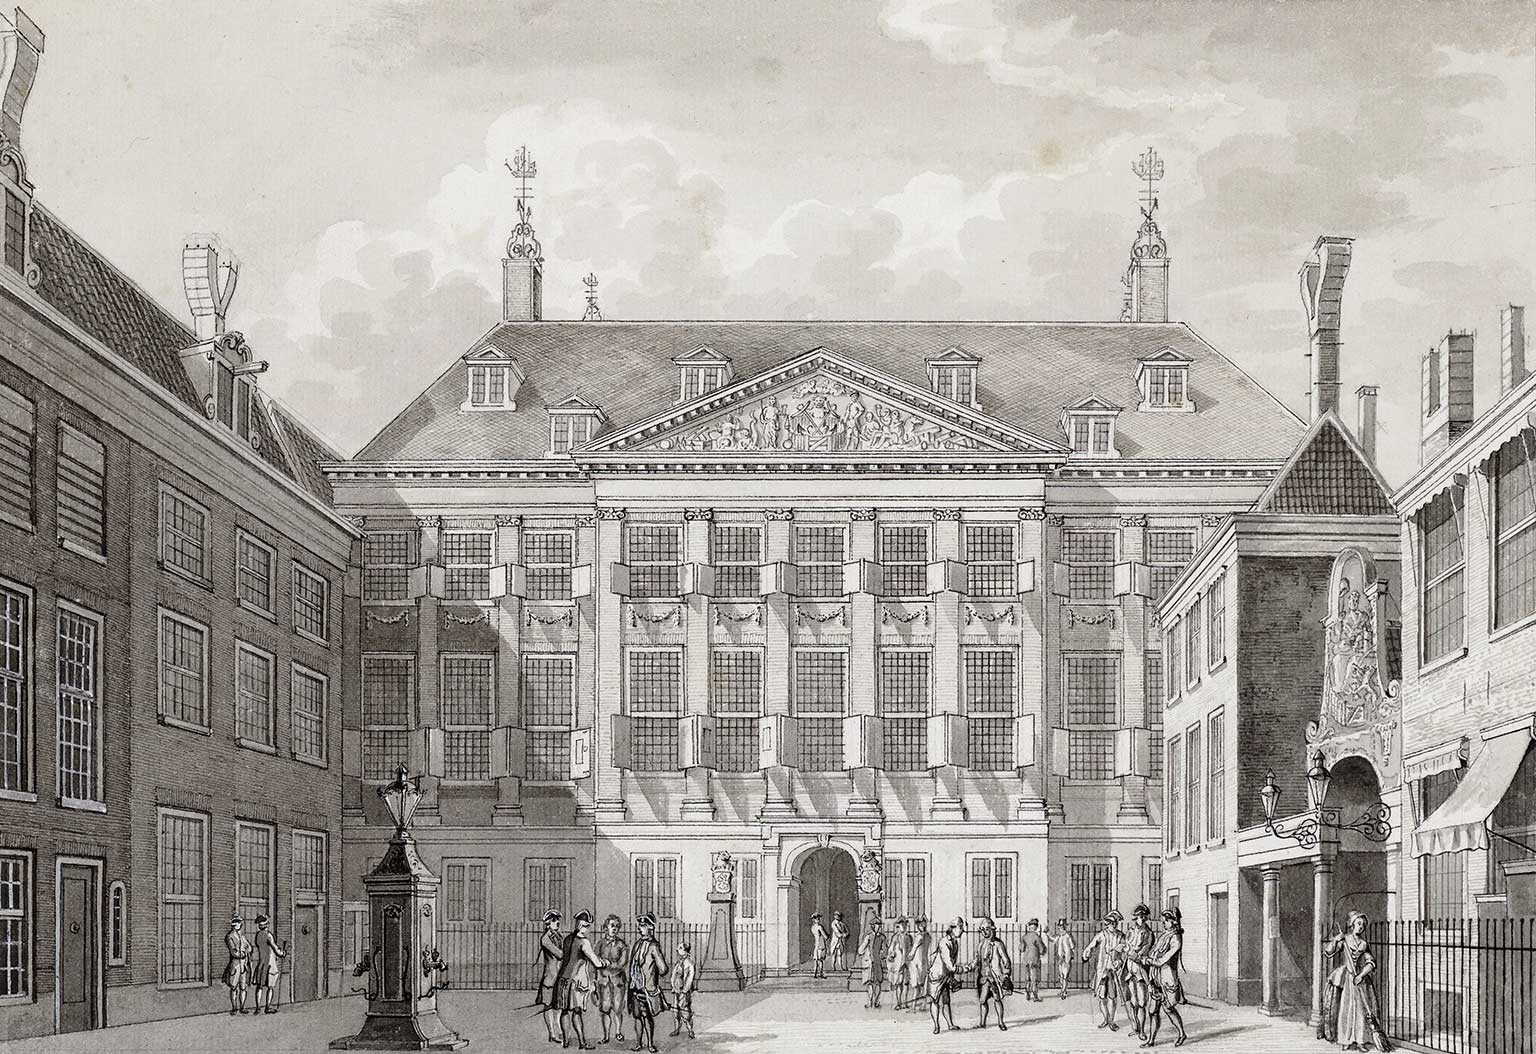 Admiralty building on the courtyard of the Prinsenhof, Amsterdam, in 1783